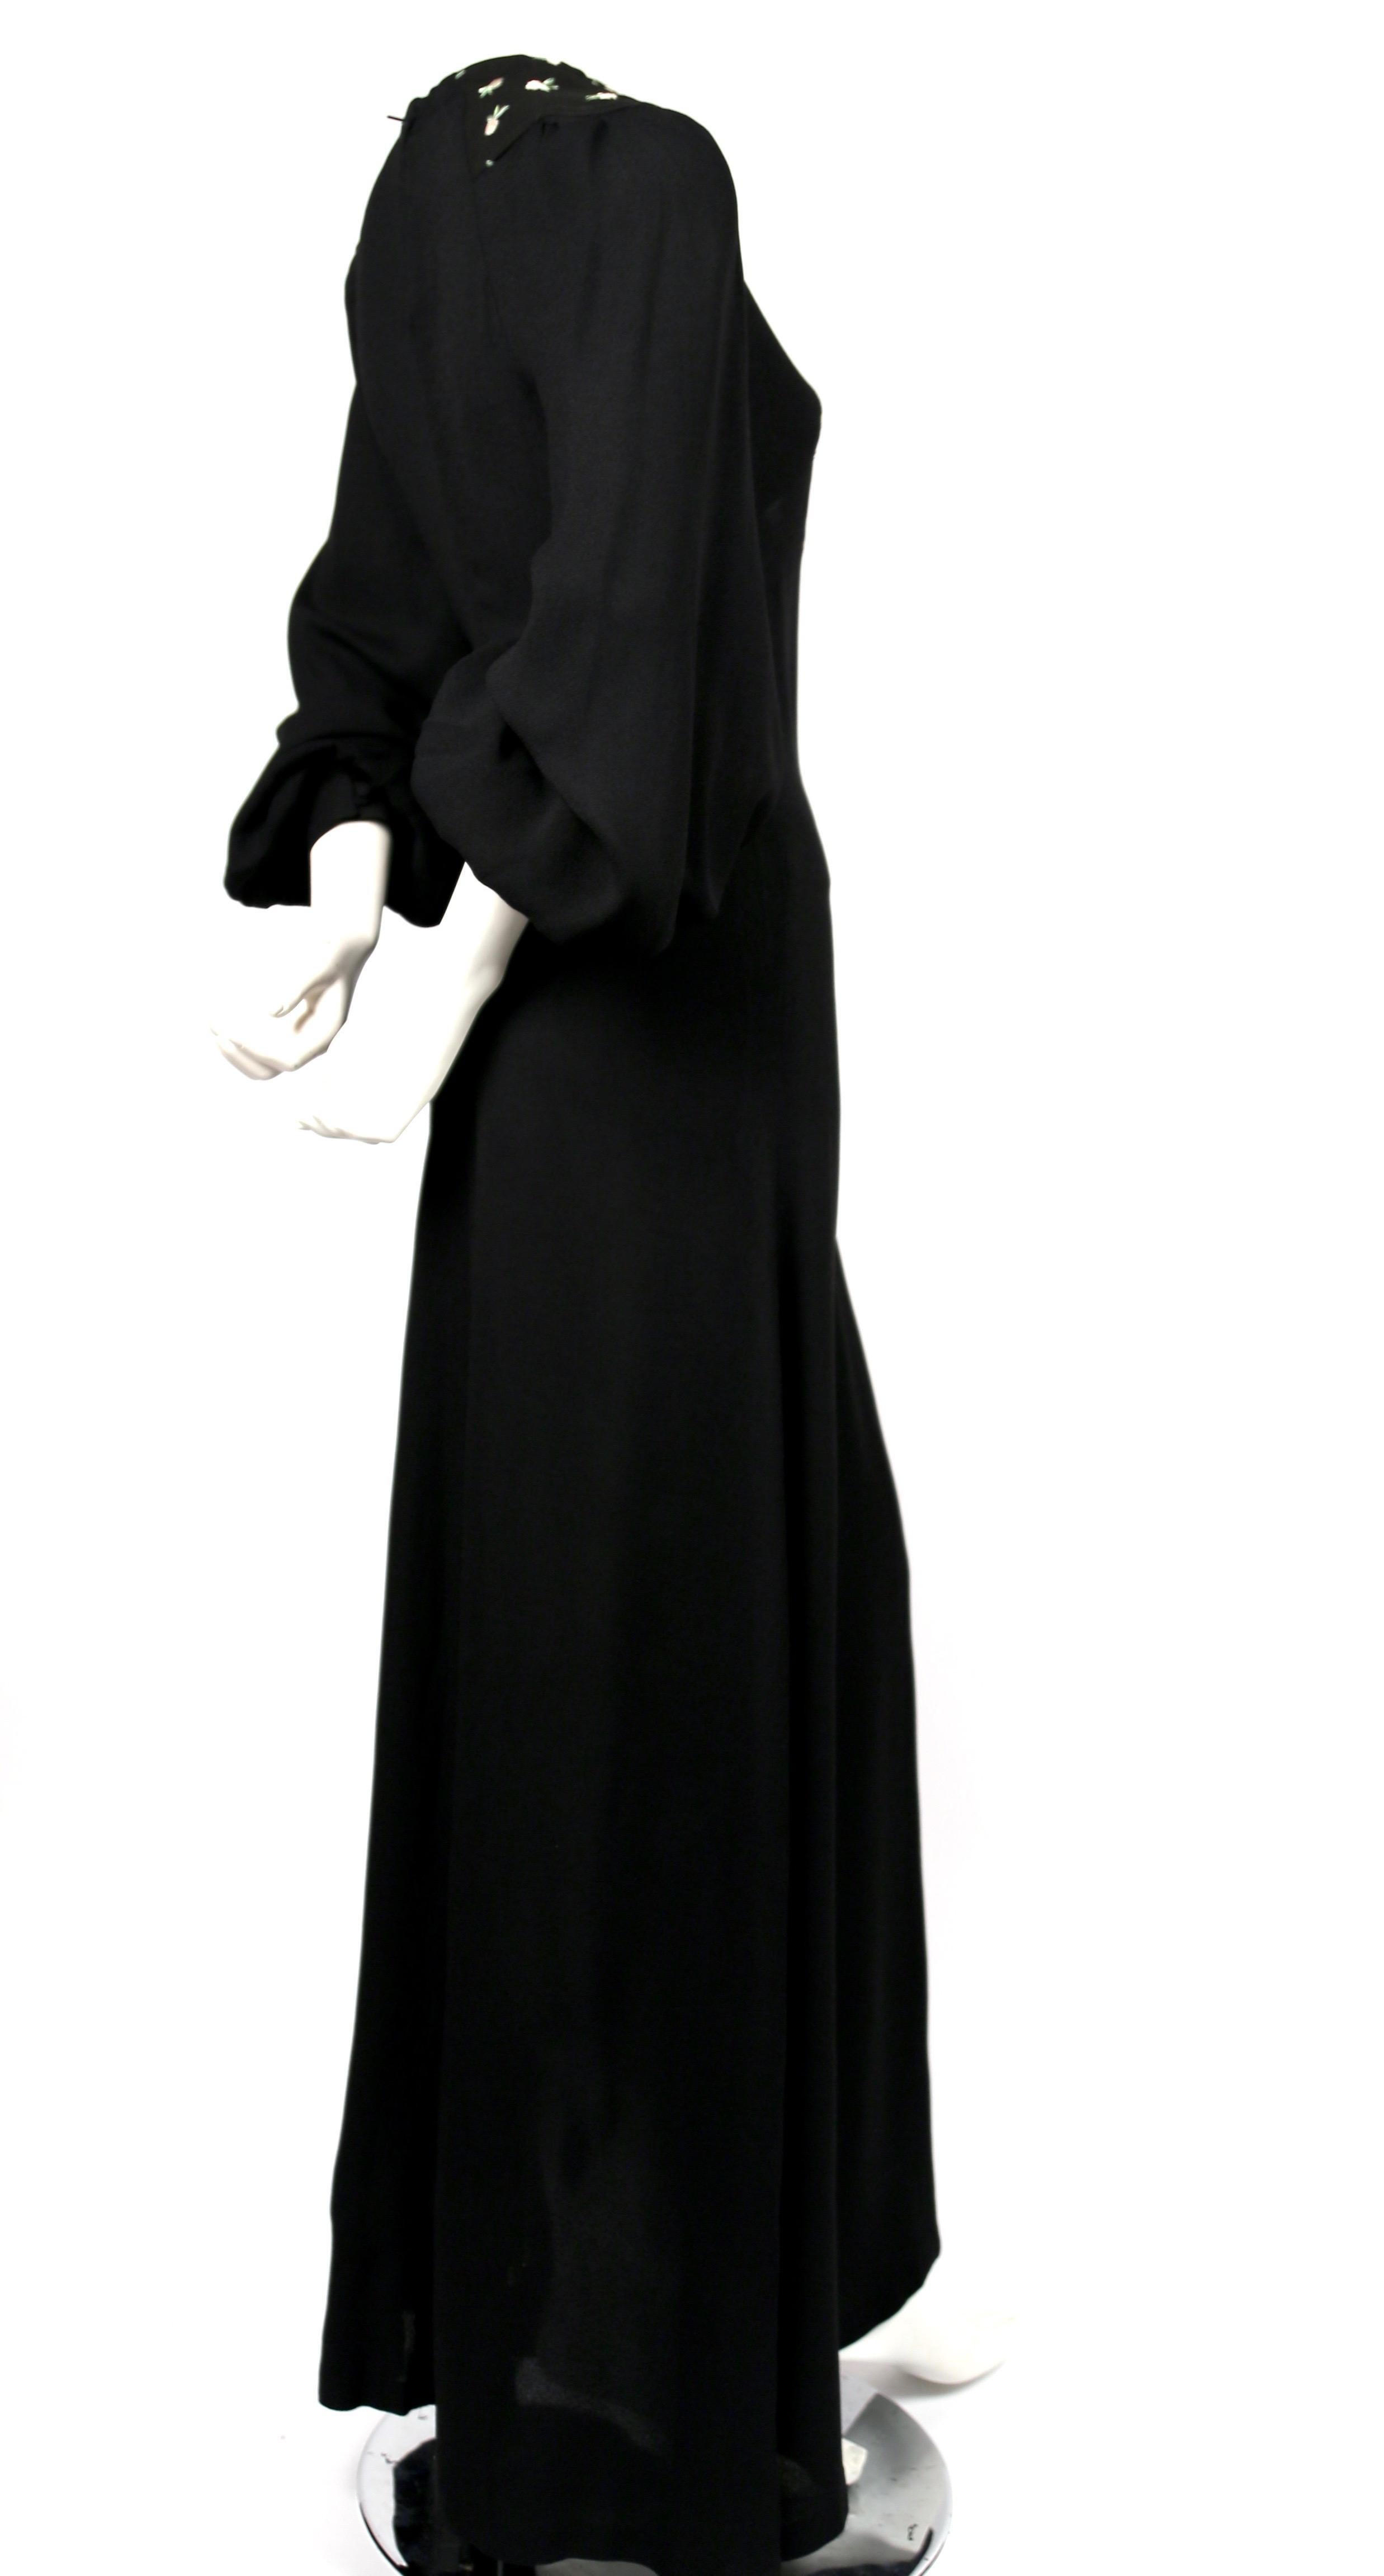 Black 1970's OSSIE CLARK black moss crepe dress with keyhole neck and embroidery